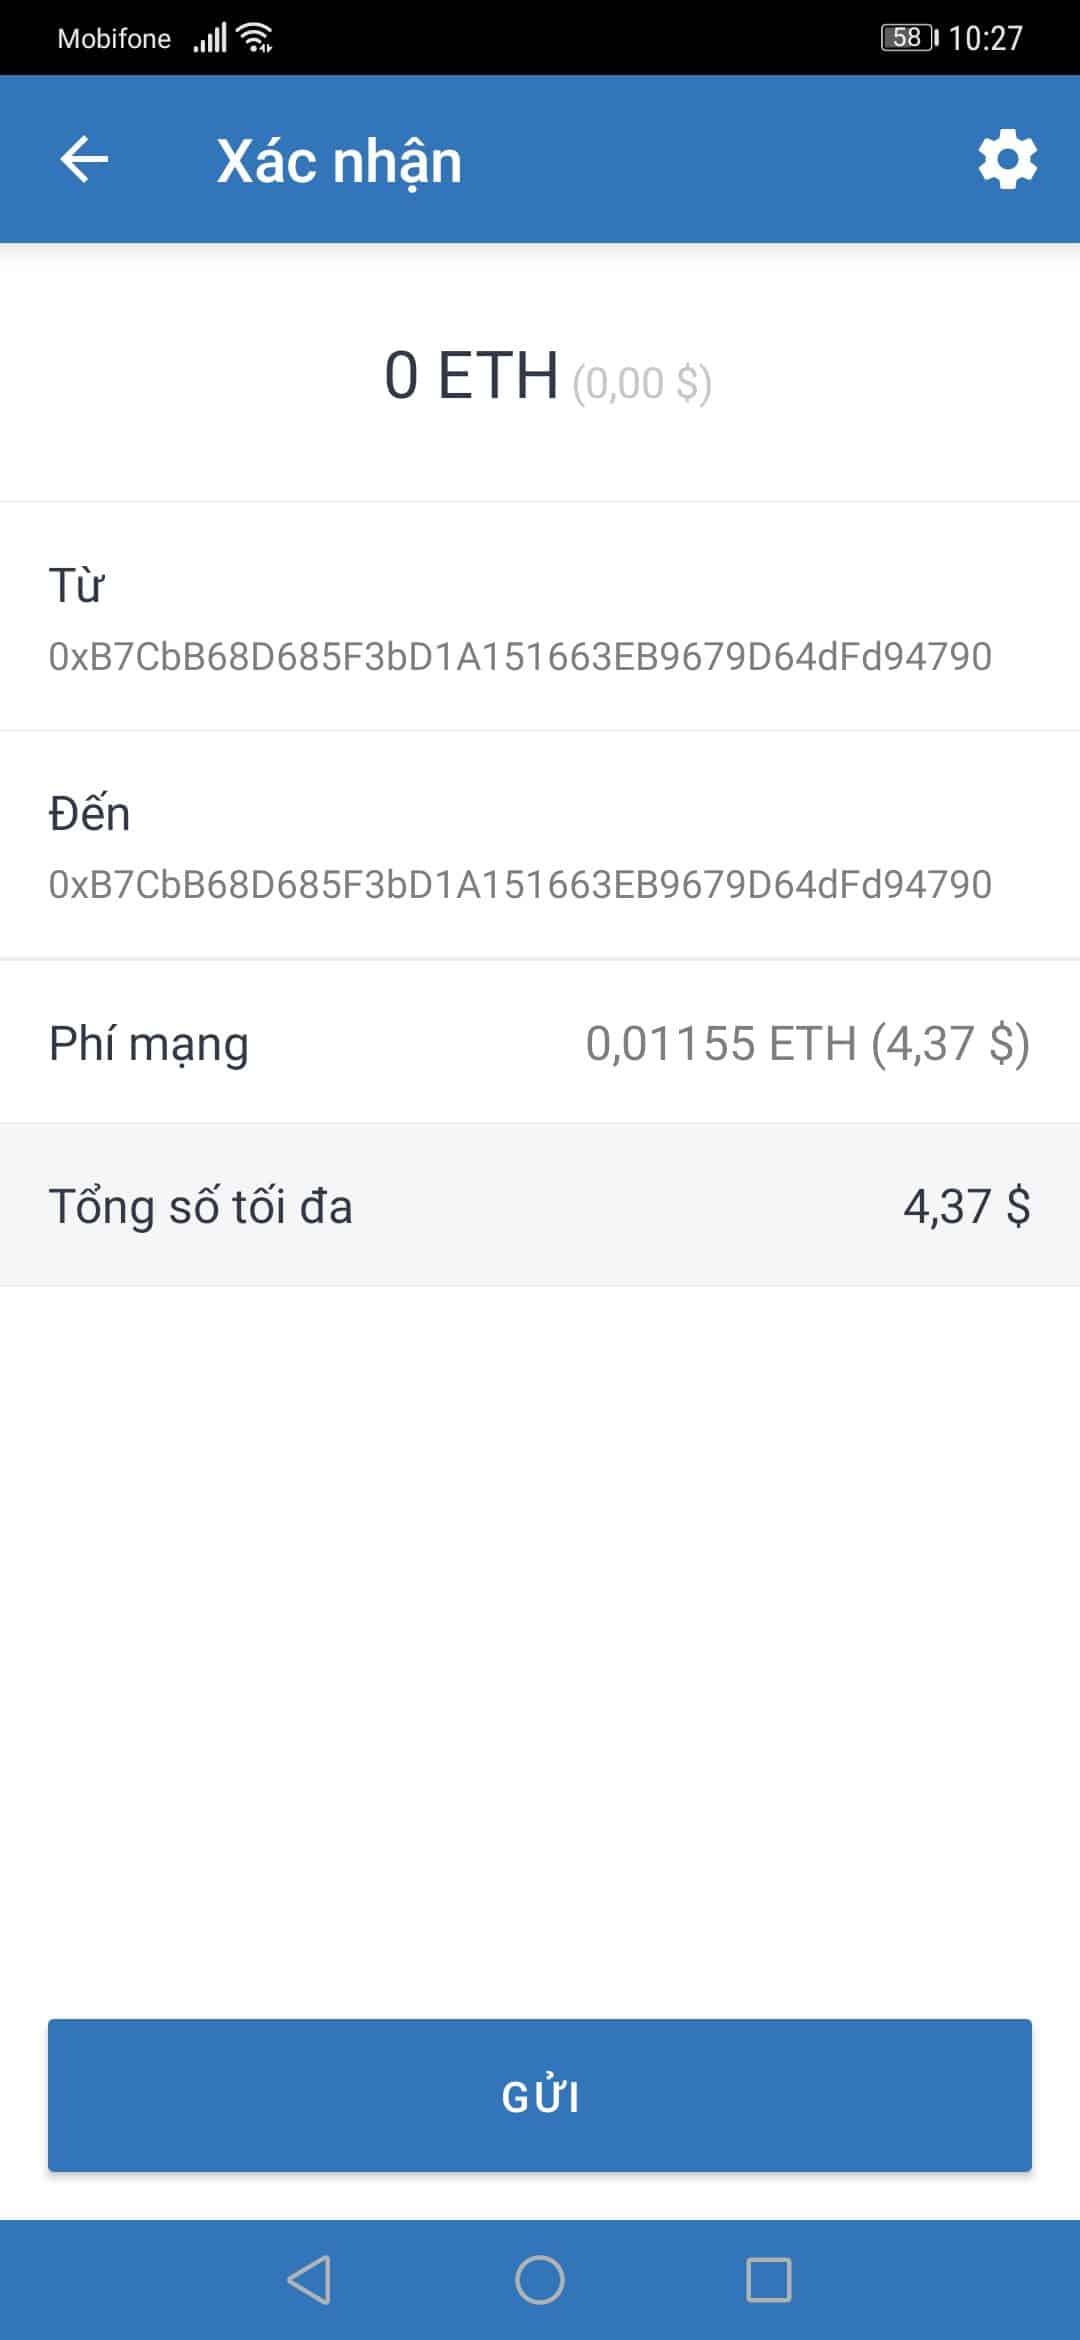 How to manage pending ETH (Ethereum) transfer orders